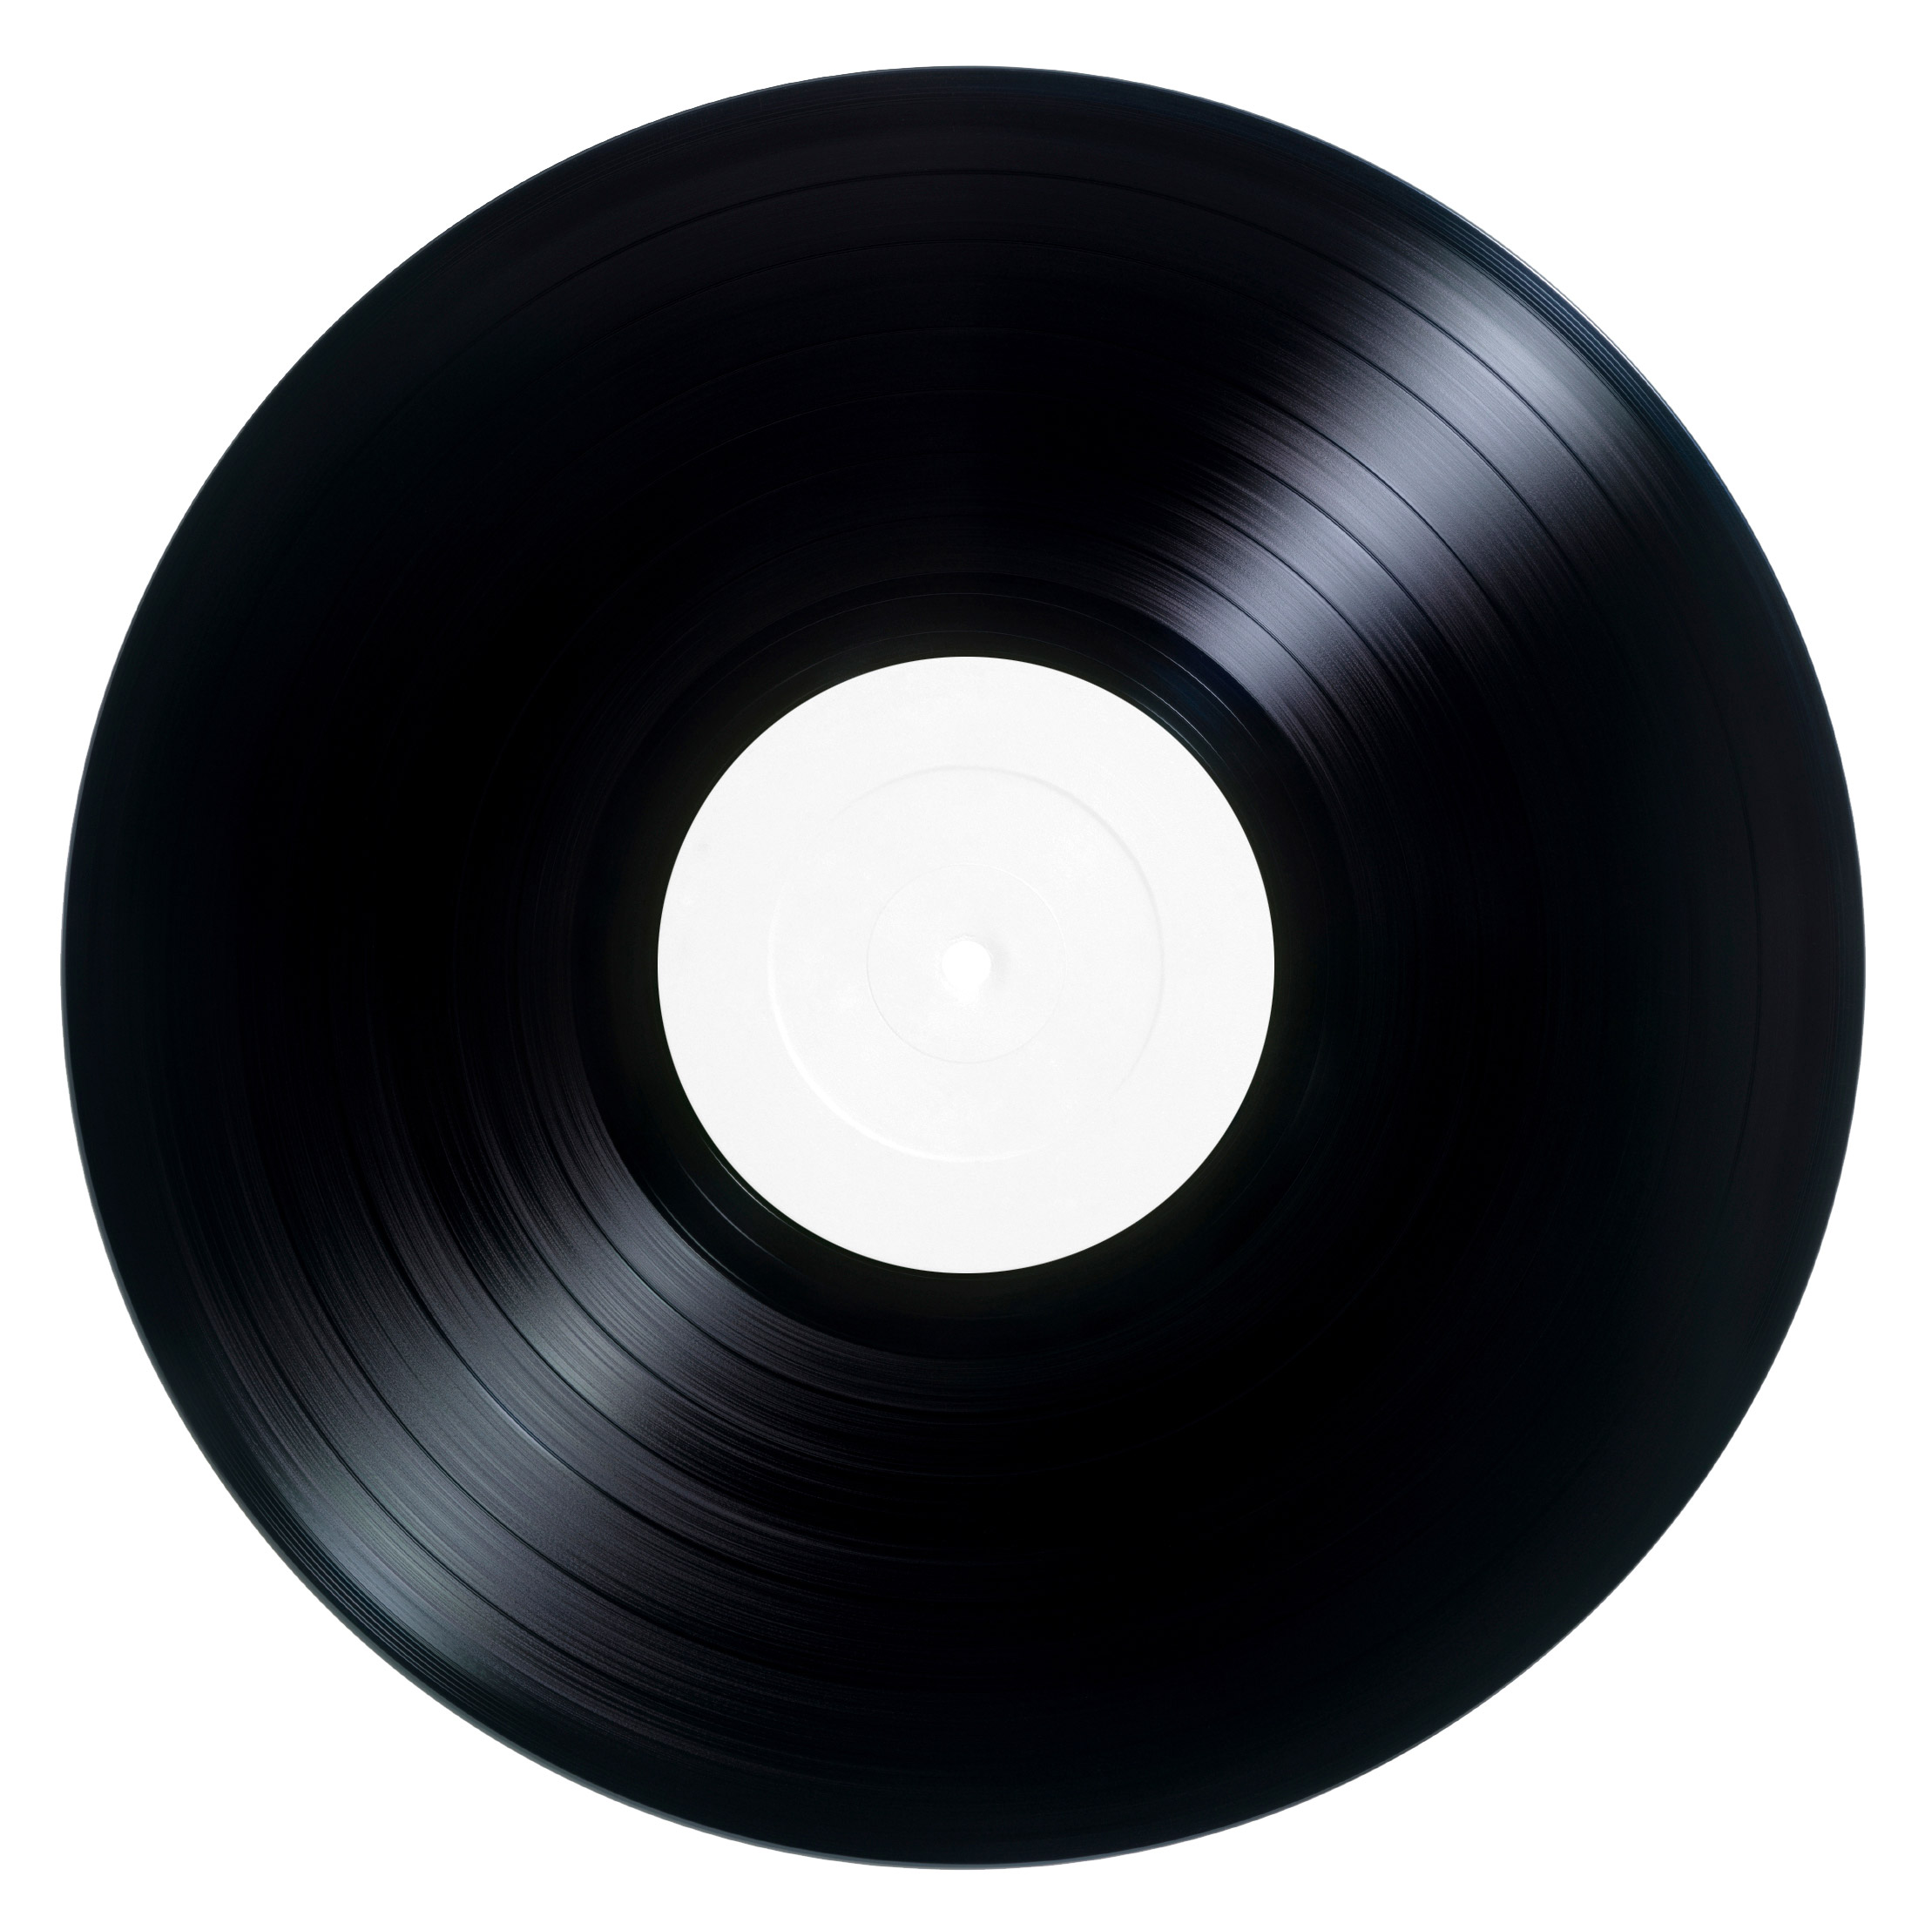 COLOR SPECIAL EFFECT VINYL – Furnace Record Pressing